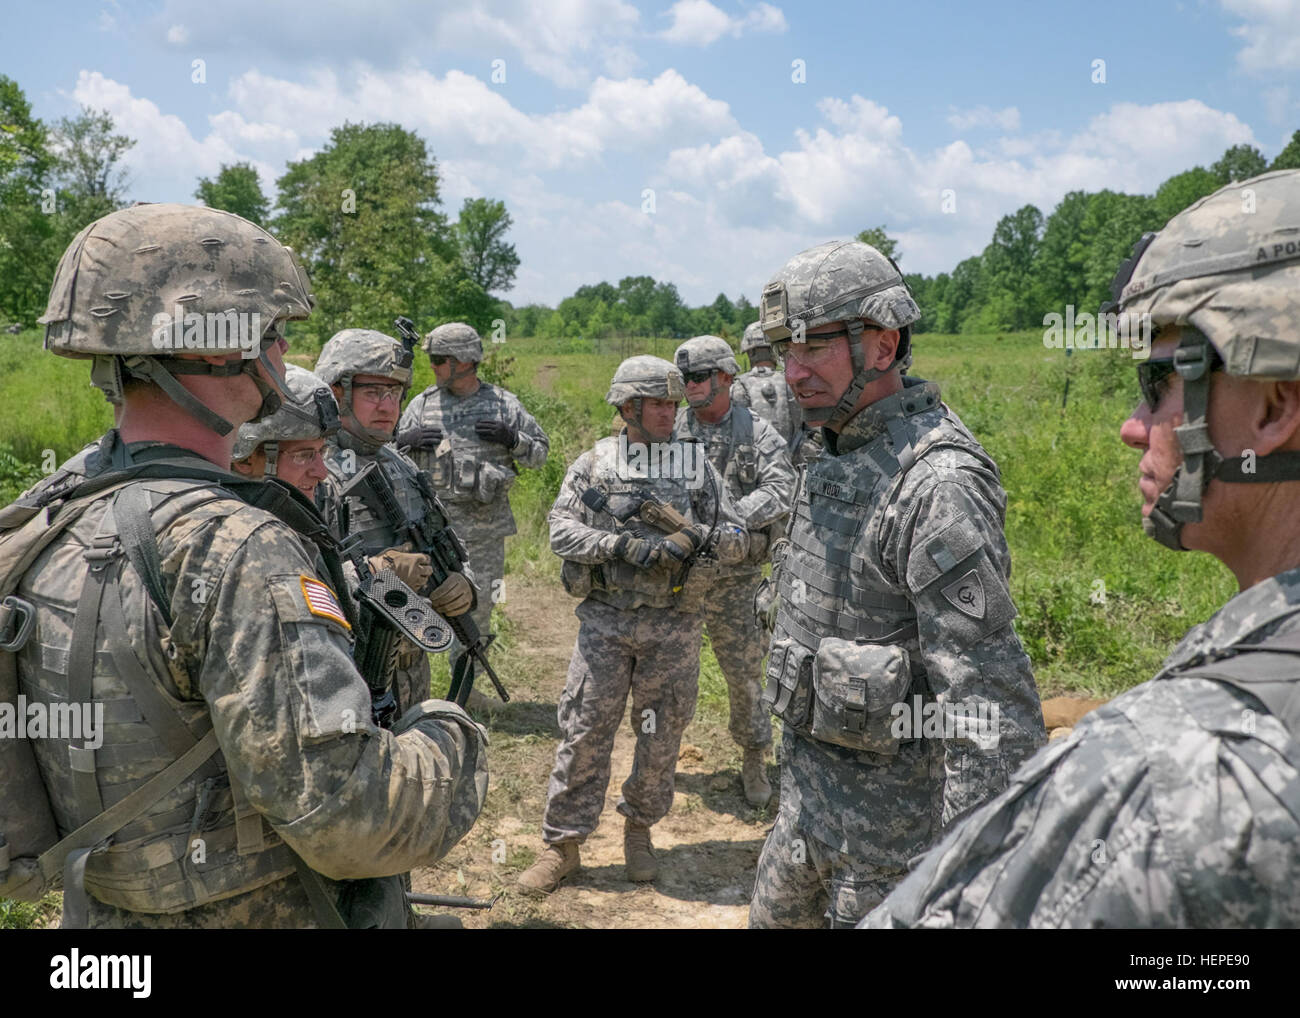 Maj. Gen. David C. Wood, 38th Infantry Division commander, speaks to B company 2-151 Infantry at Camp Atterbury, June 5. (Army National Guard photo by Sgt. Daniel Dyar) 38th ID visits 76th IBCT 150605-A-KO667-240 Stock Photo